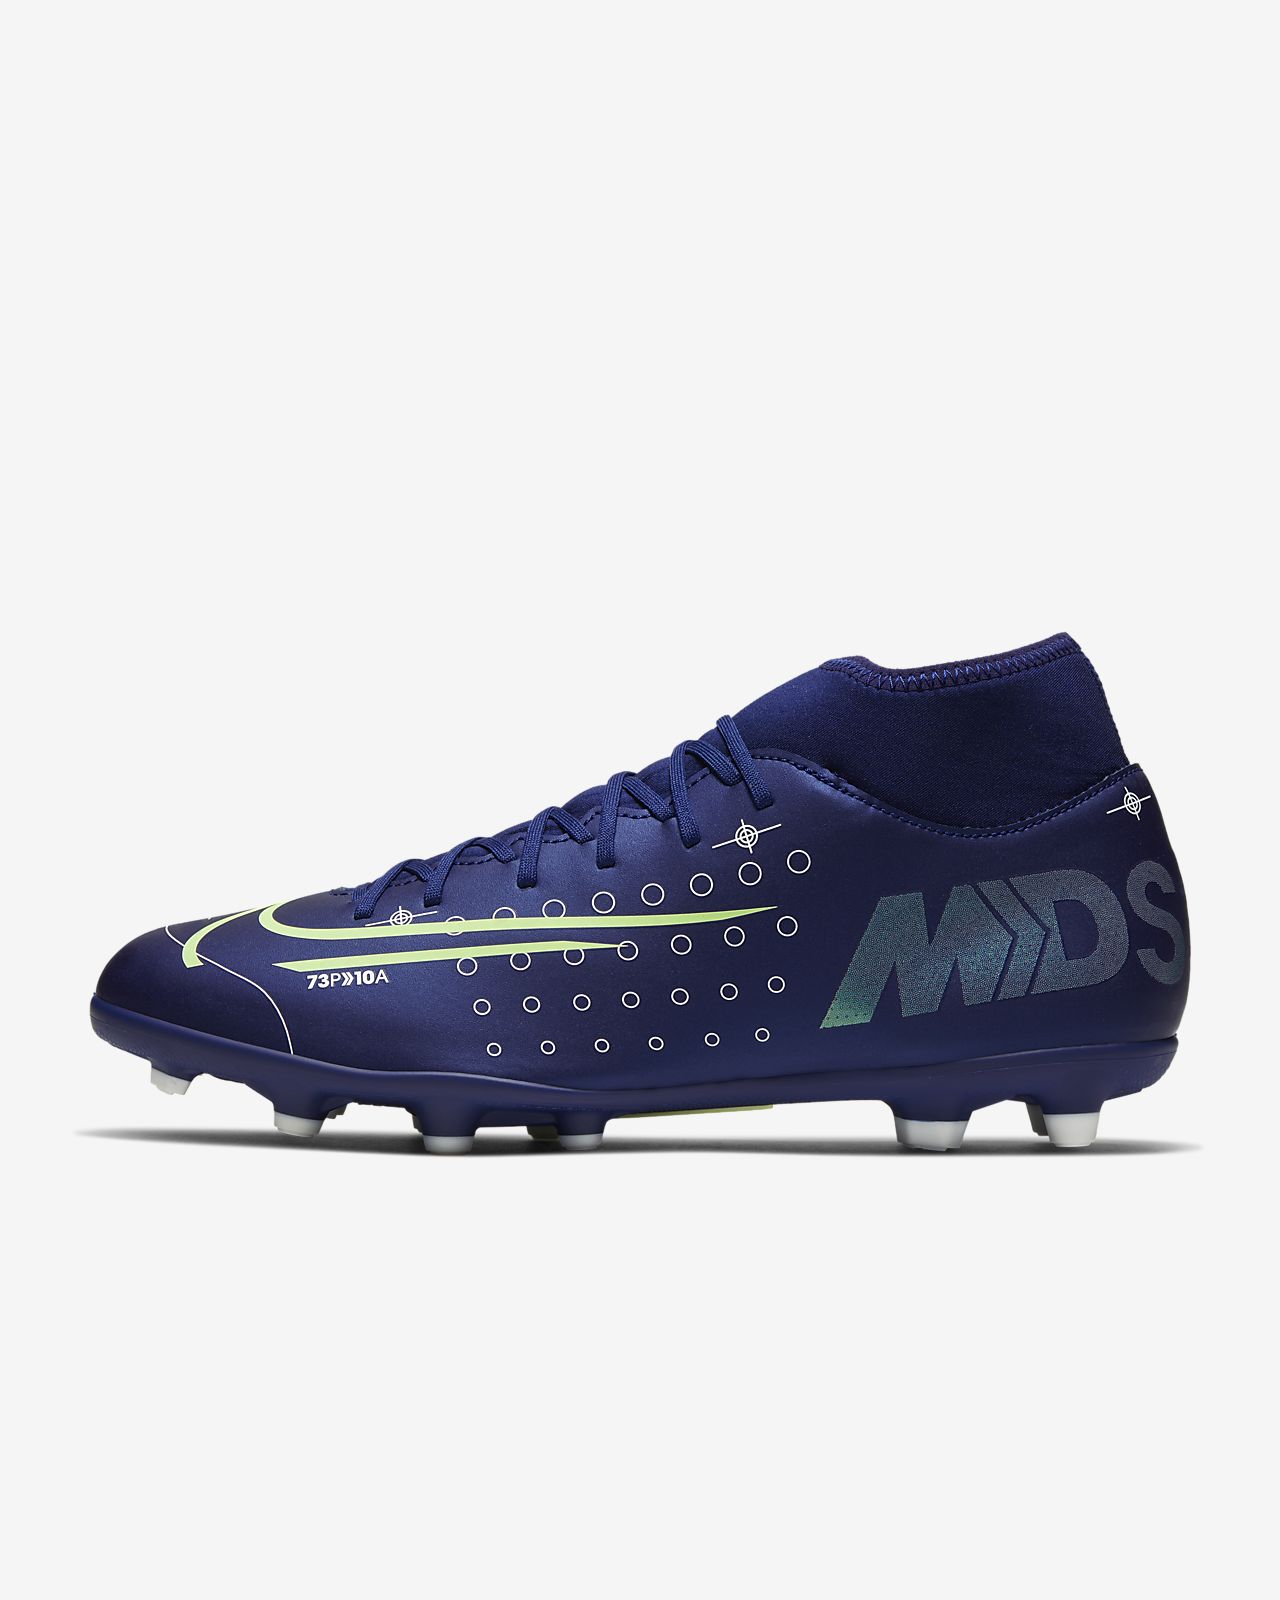 Nike Mercurial Superfly 5 (Spark Brilliance Pack) YouTube